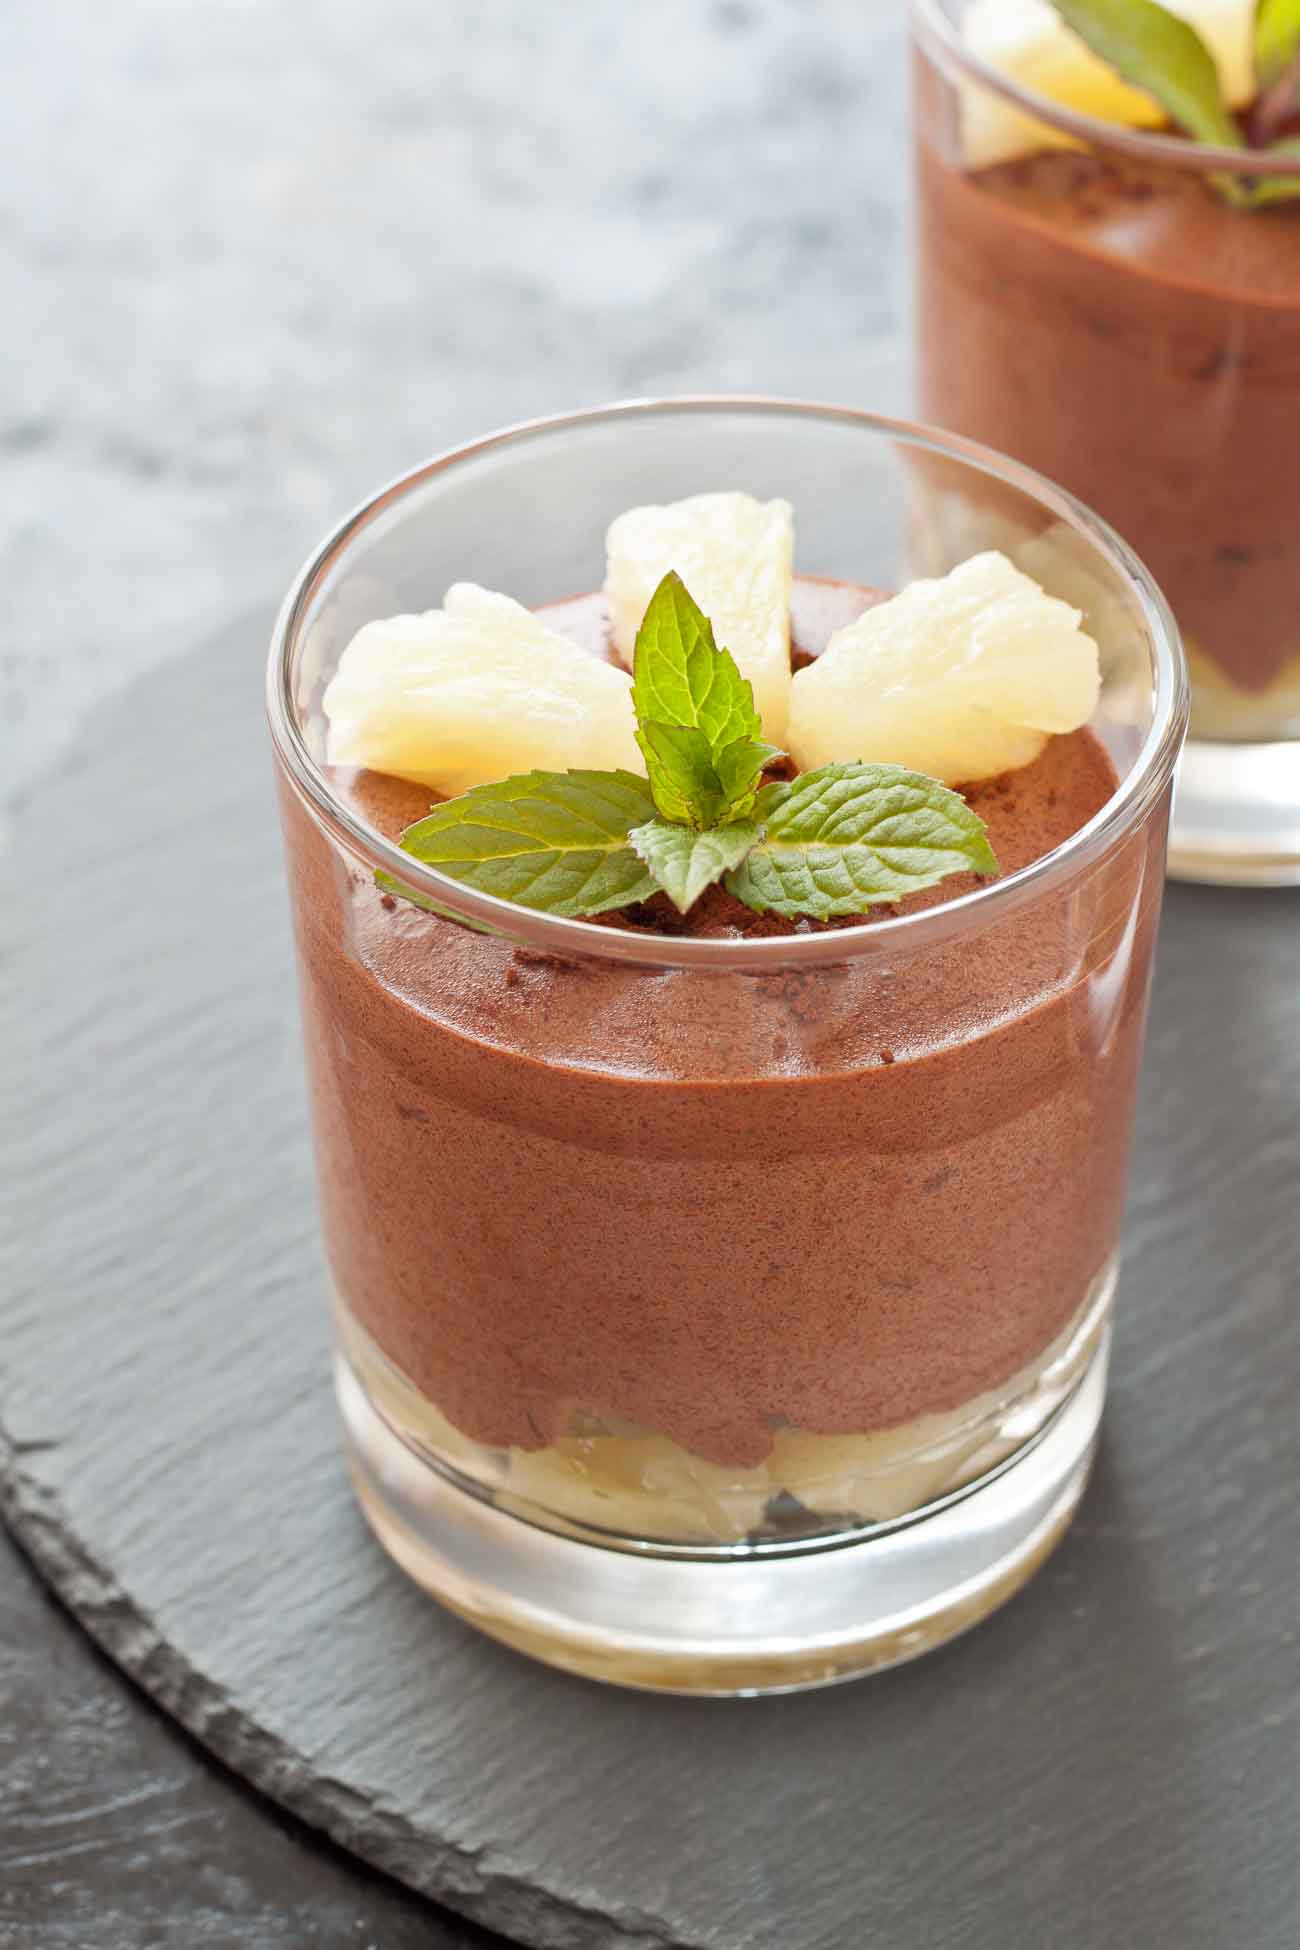 Homemade Chocolate Mousse With Pineapple Recipe by Archana's Kitchen